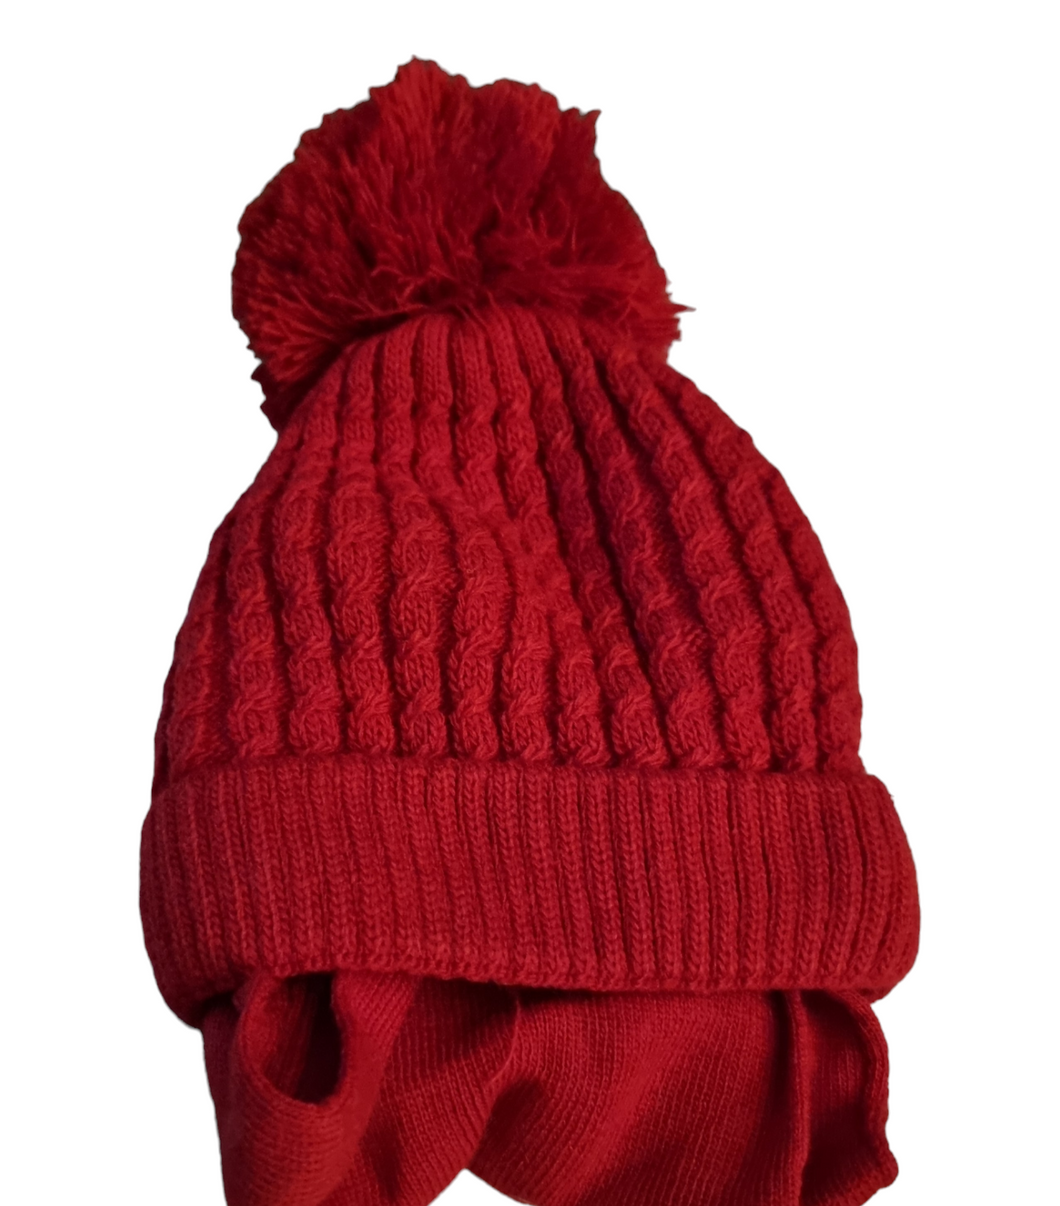 Red bobble hat and scarf